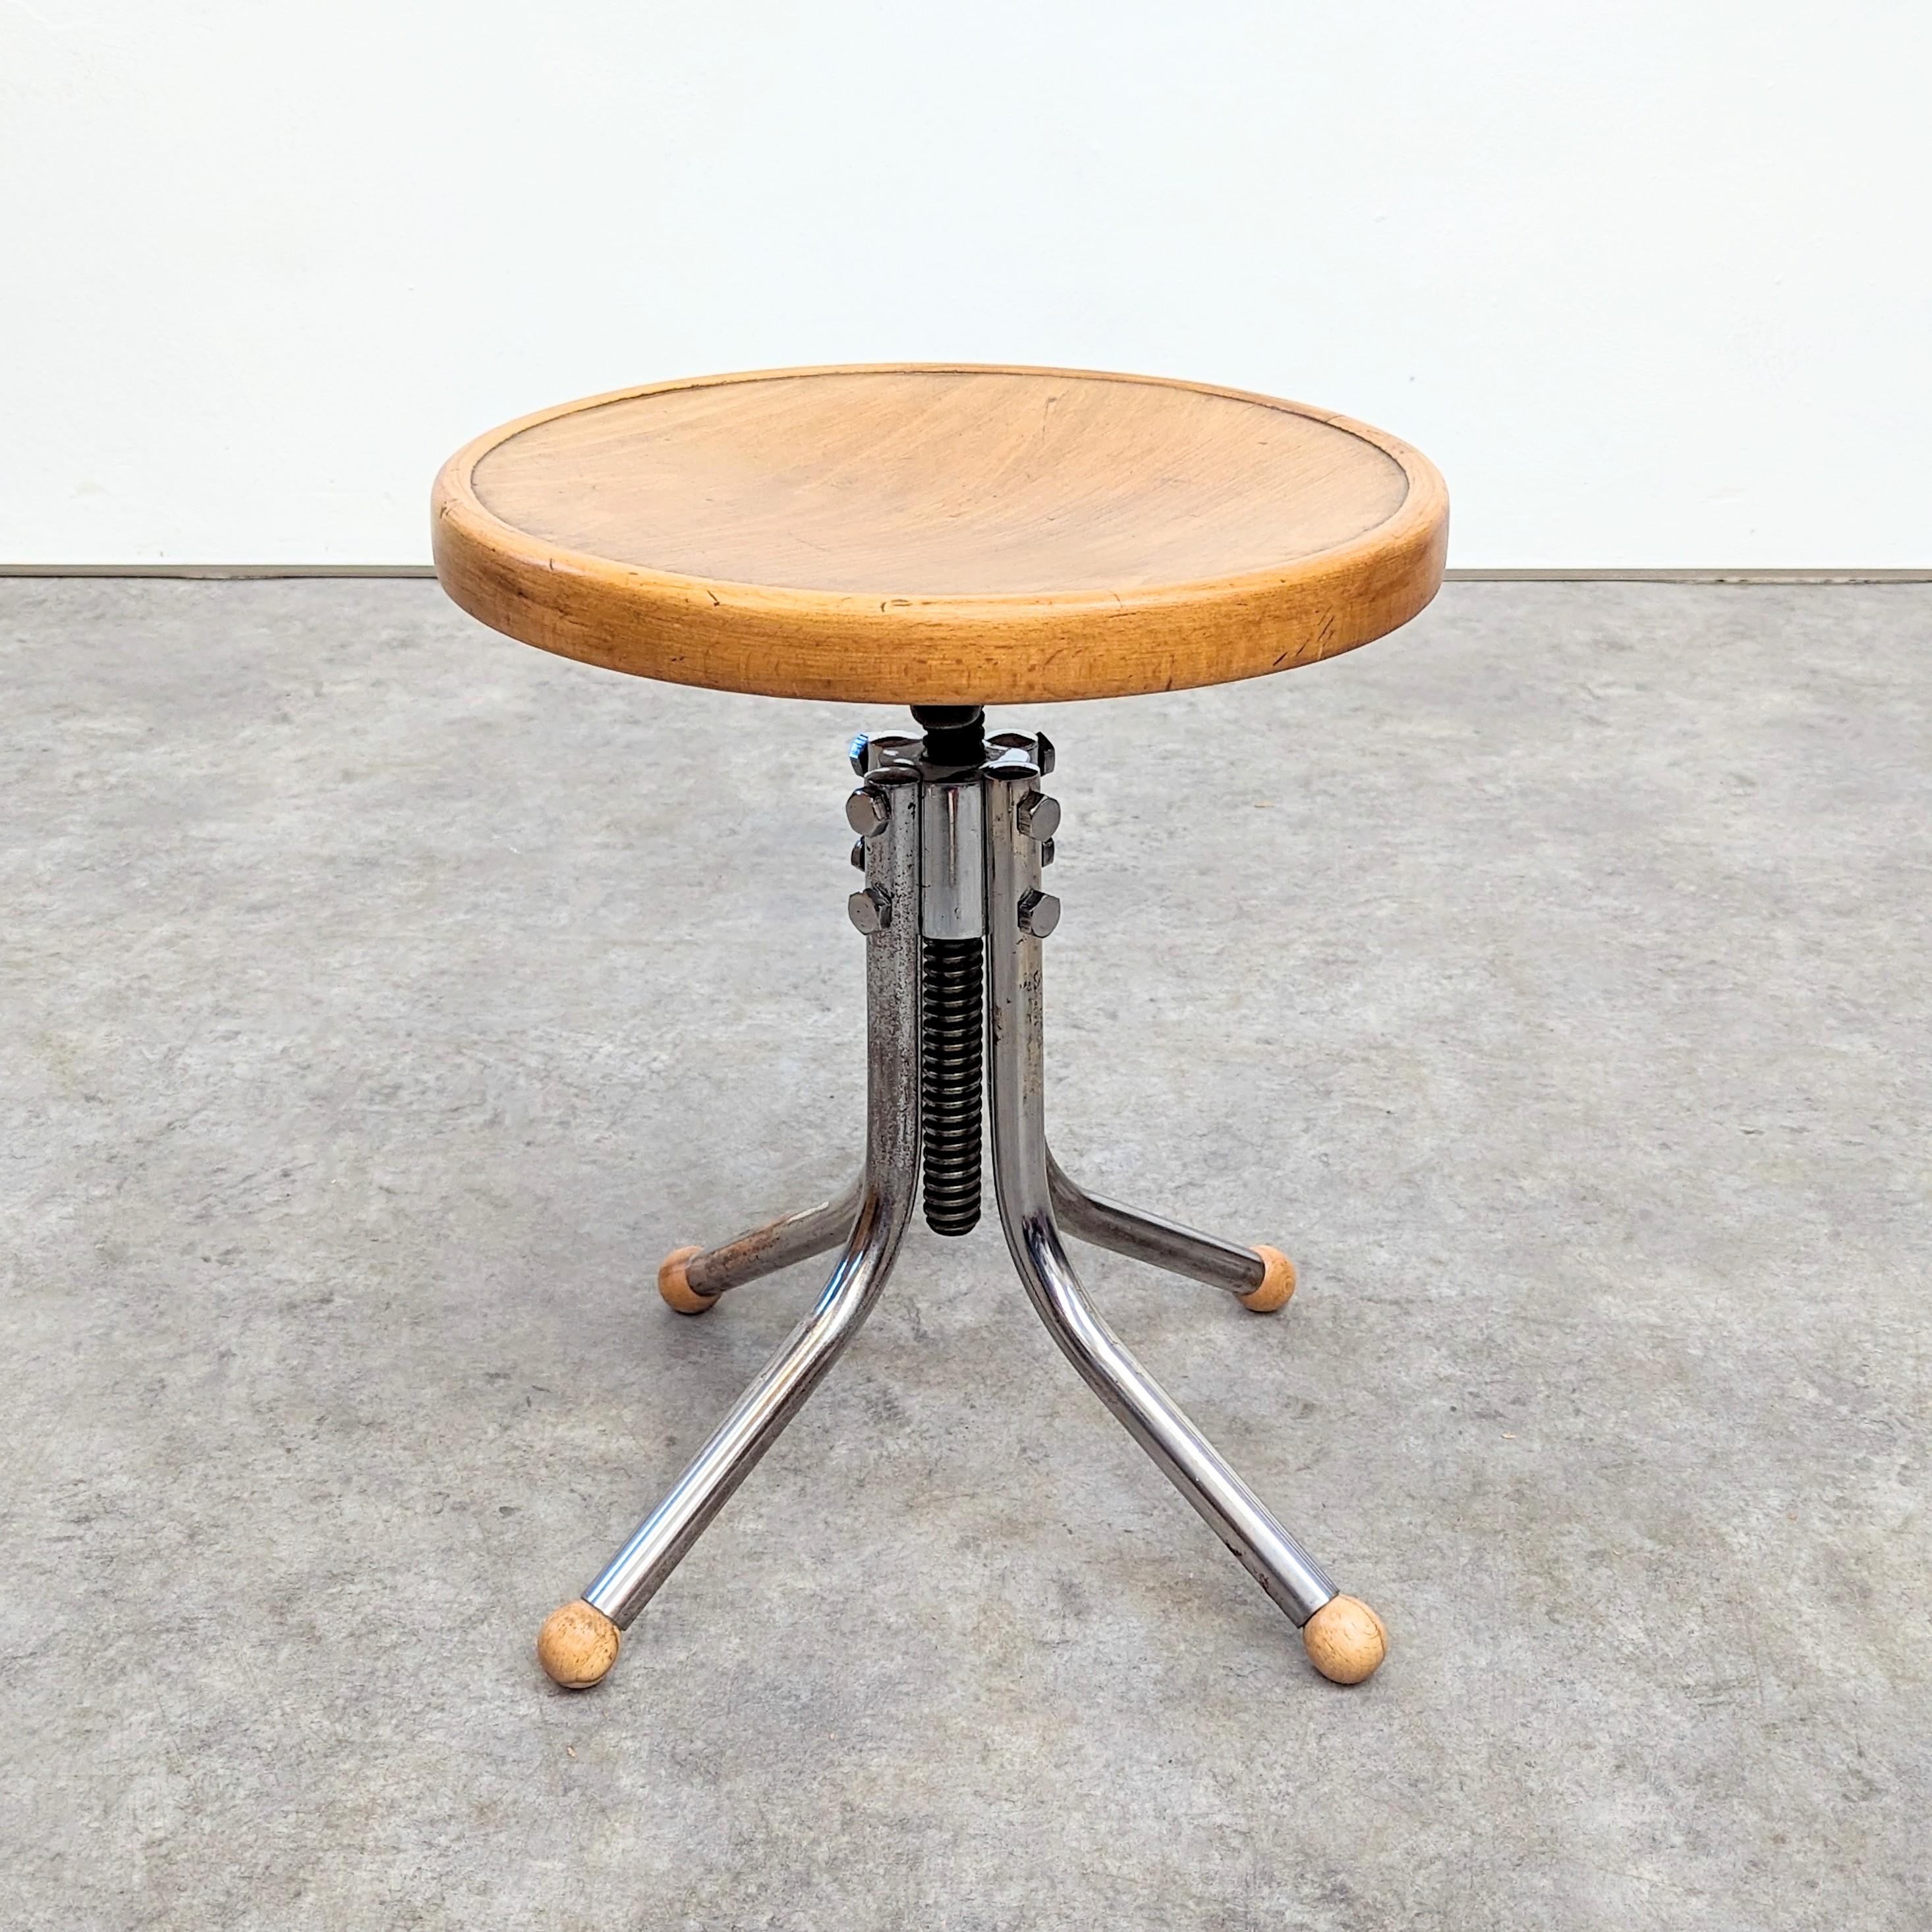 C. 1930 manufactured, for Thonet under licence from Robert Slezak in the 1930s, adjustable round piano stool, with tubular steel support on four legs and round wooden seat. Dimensions: height c. 42 cm, diameter c. 50 cm.
Slezak factory catalogue,